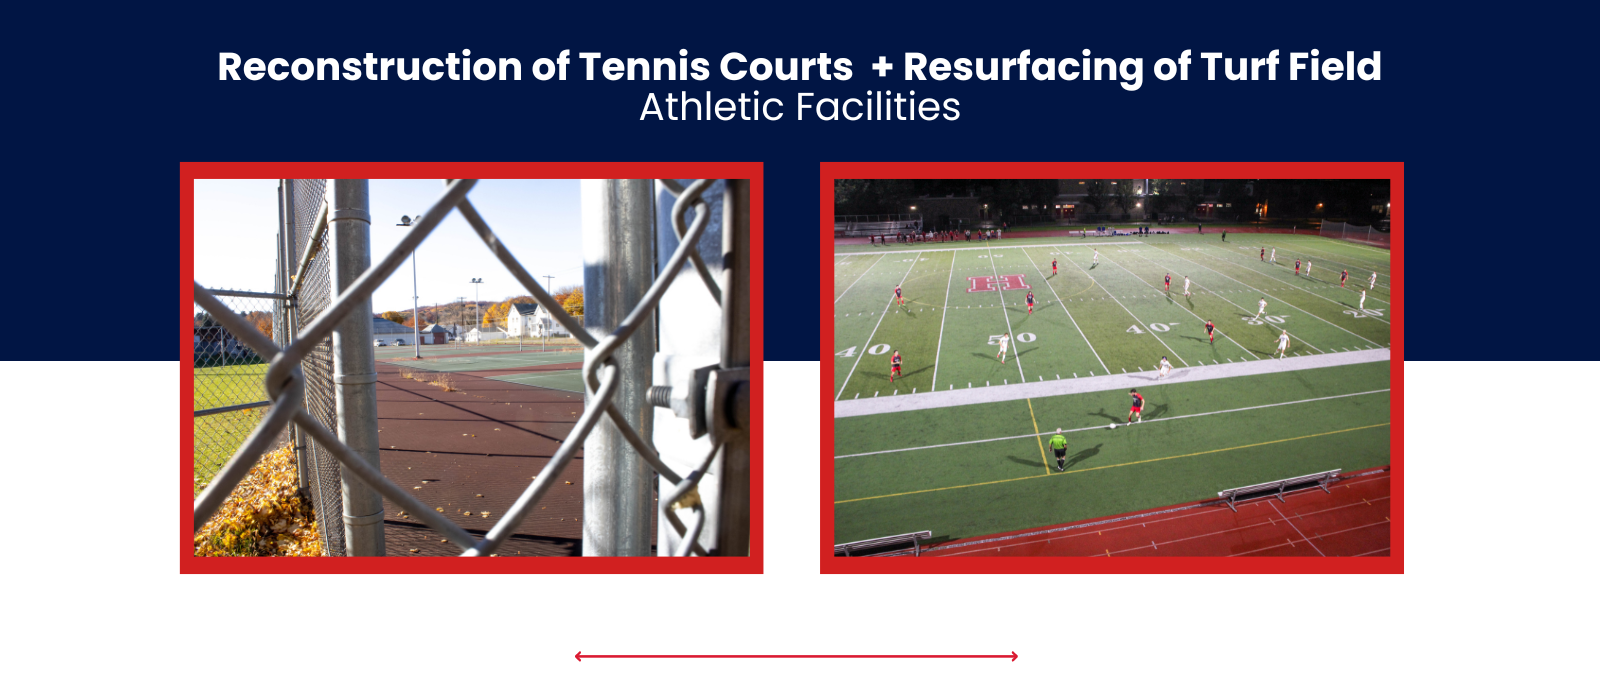 Reconstruction of Tennis Courts +Resurfacing of Turf Field
Athletic Facilities